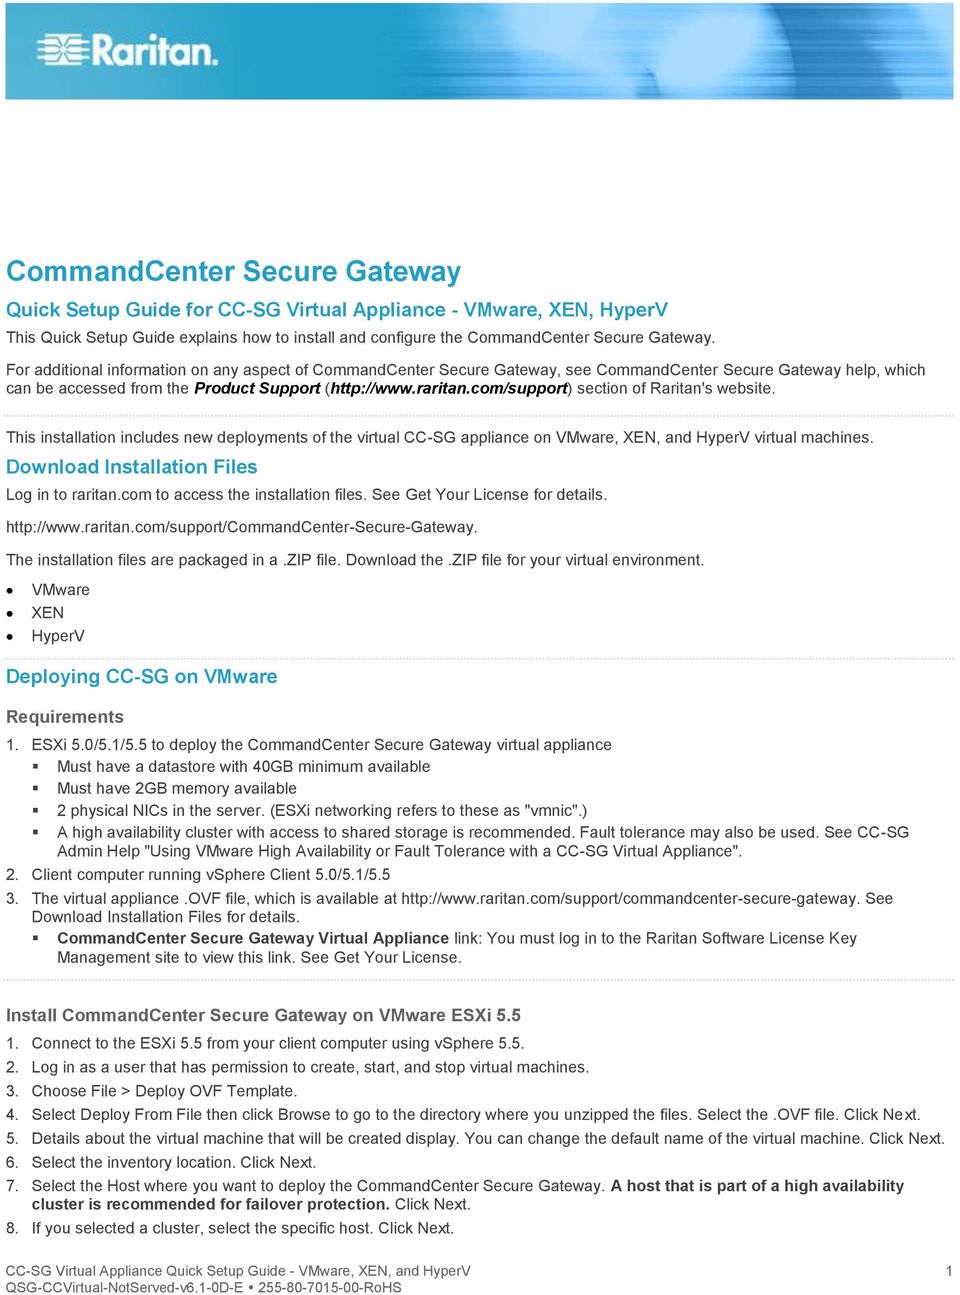 com/support) section of Raritan's website. This installation includes new deployments of the virtual CC-SG appliance on VMware, XEN, and HyperV virtual machines.